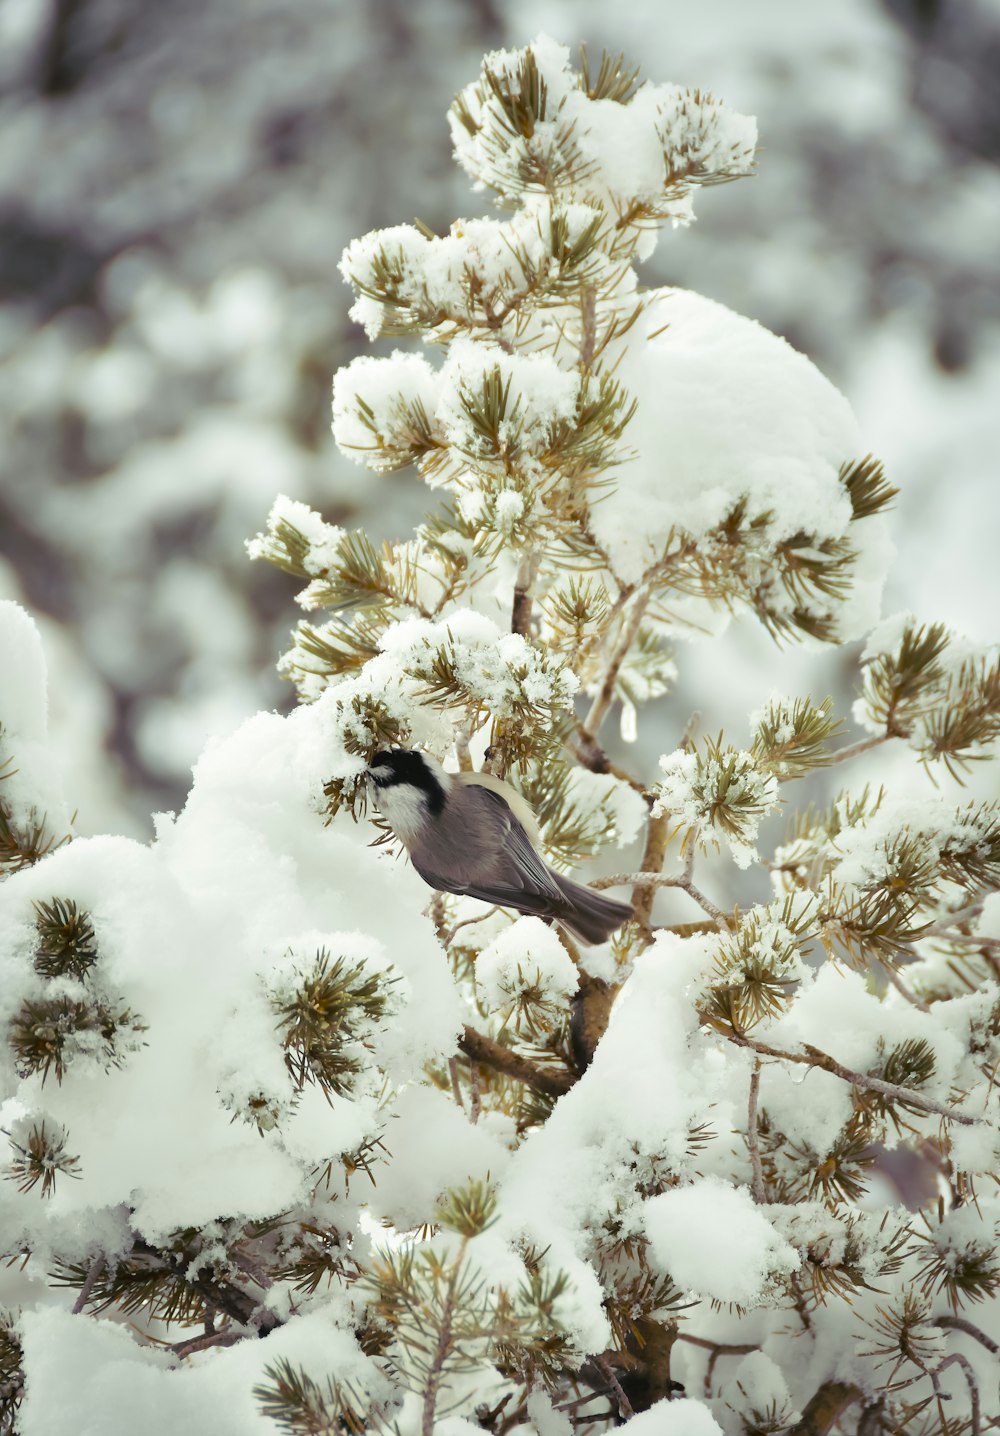 a small bird perched on top of a pine tree covered in snow